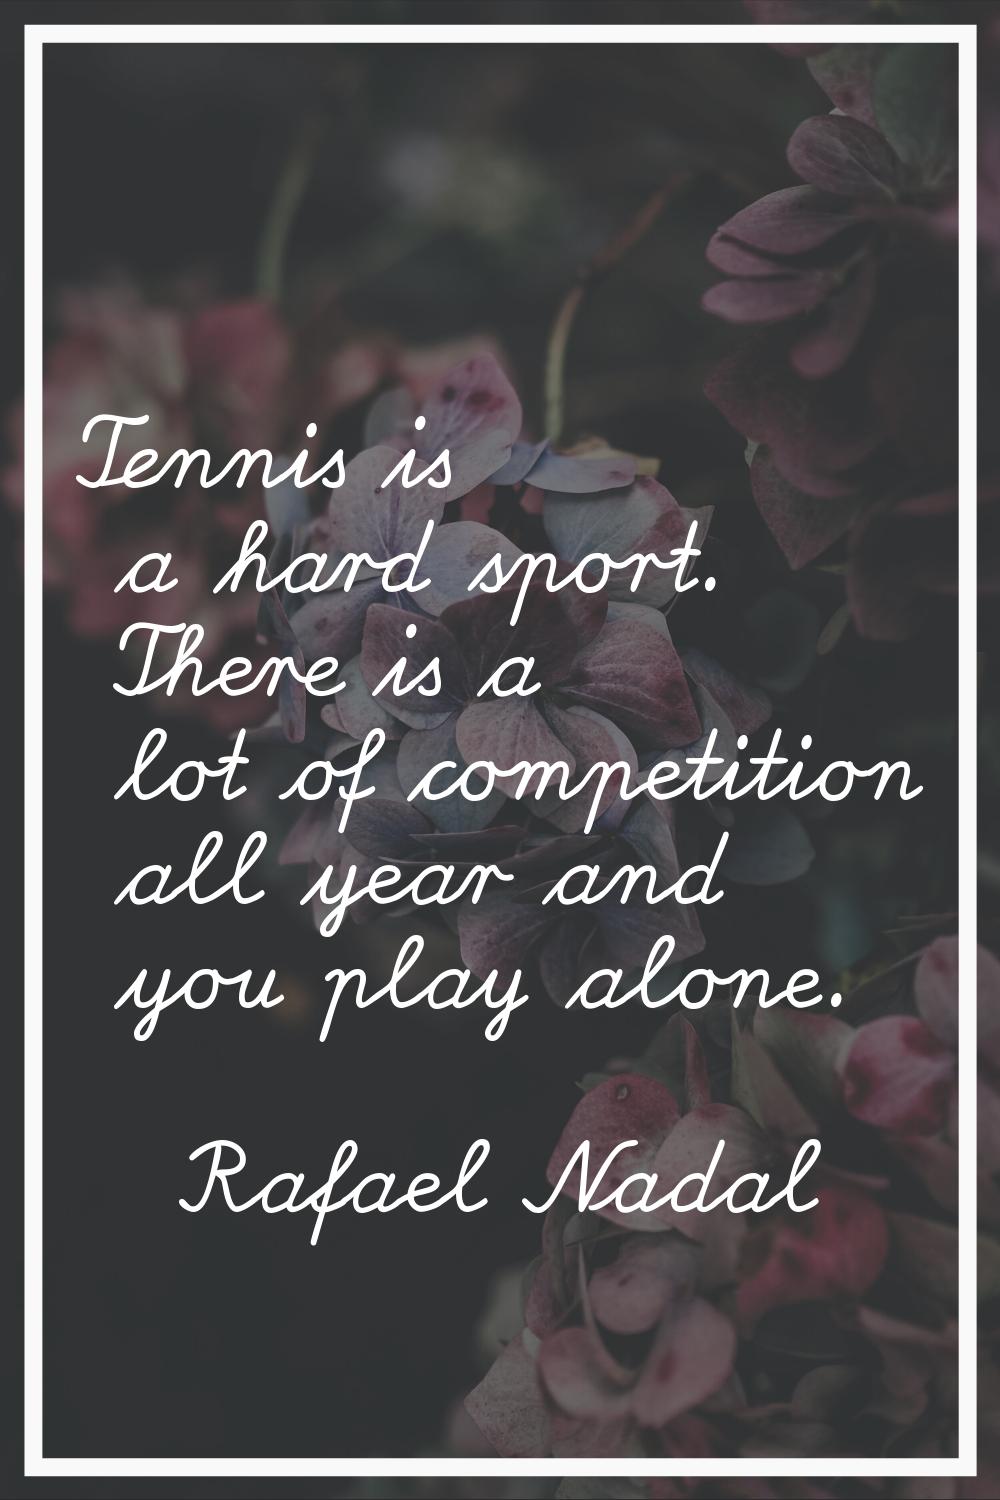 Tennis is a hard sport. There is a lot of competition all year and you play alone.